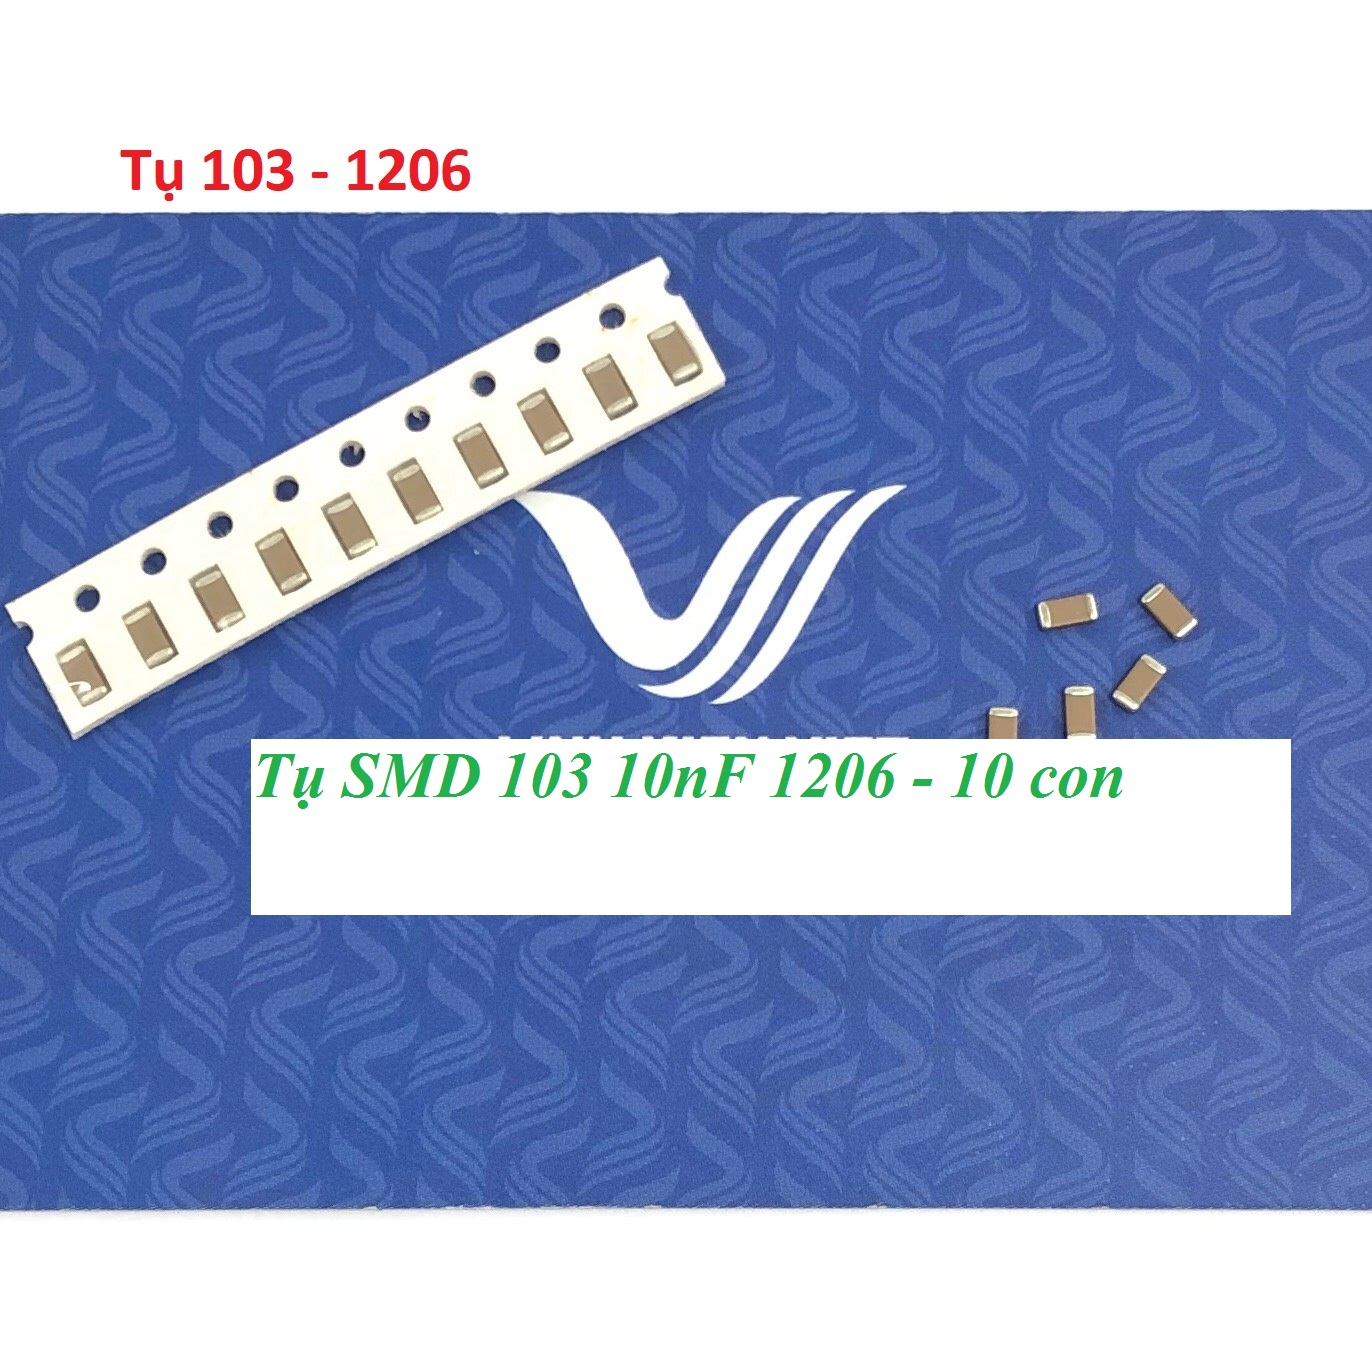 Tụ SMD 103 10nF 1206 - 10 con